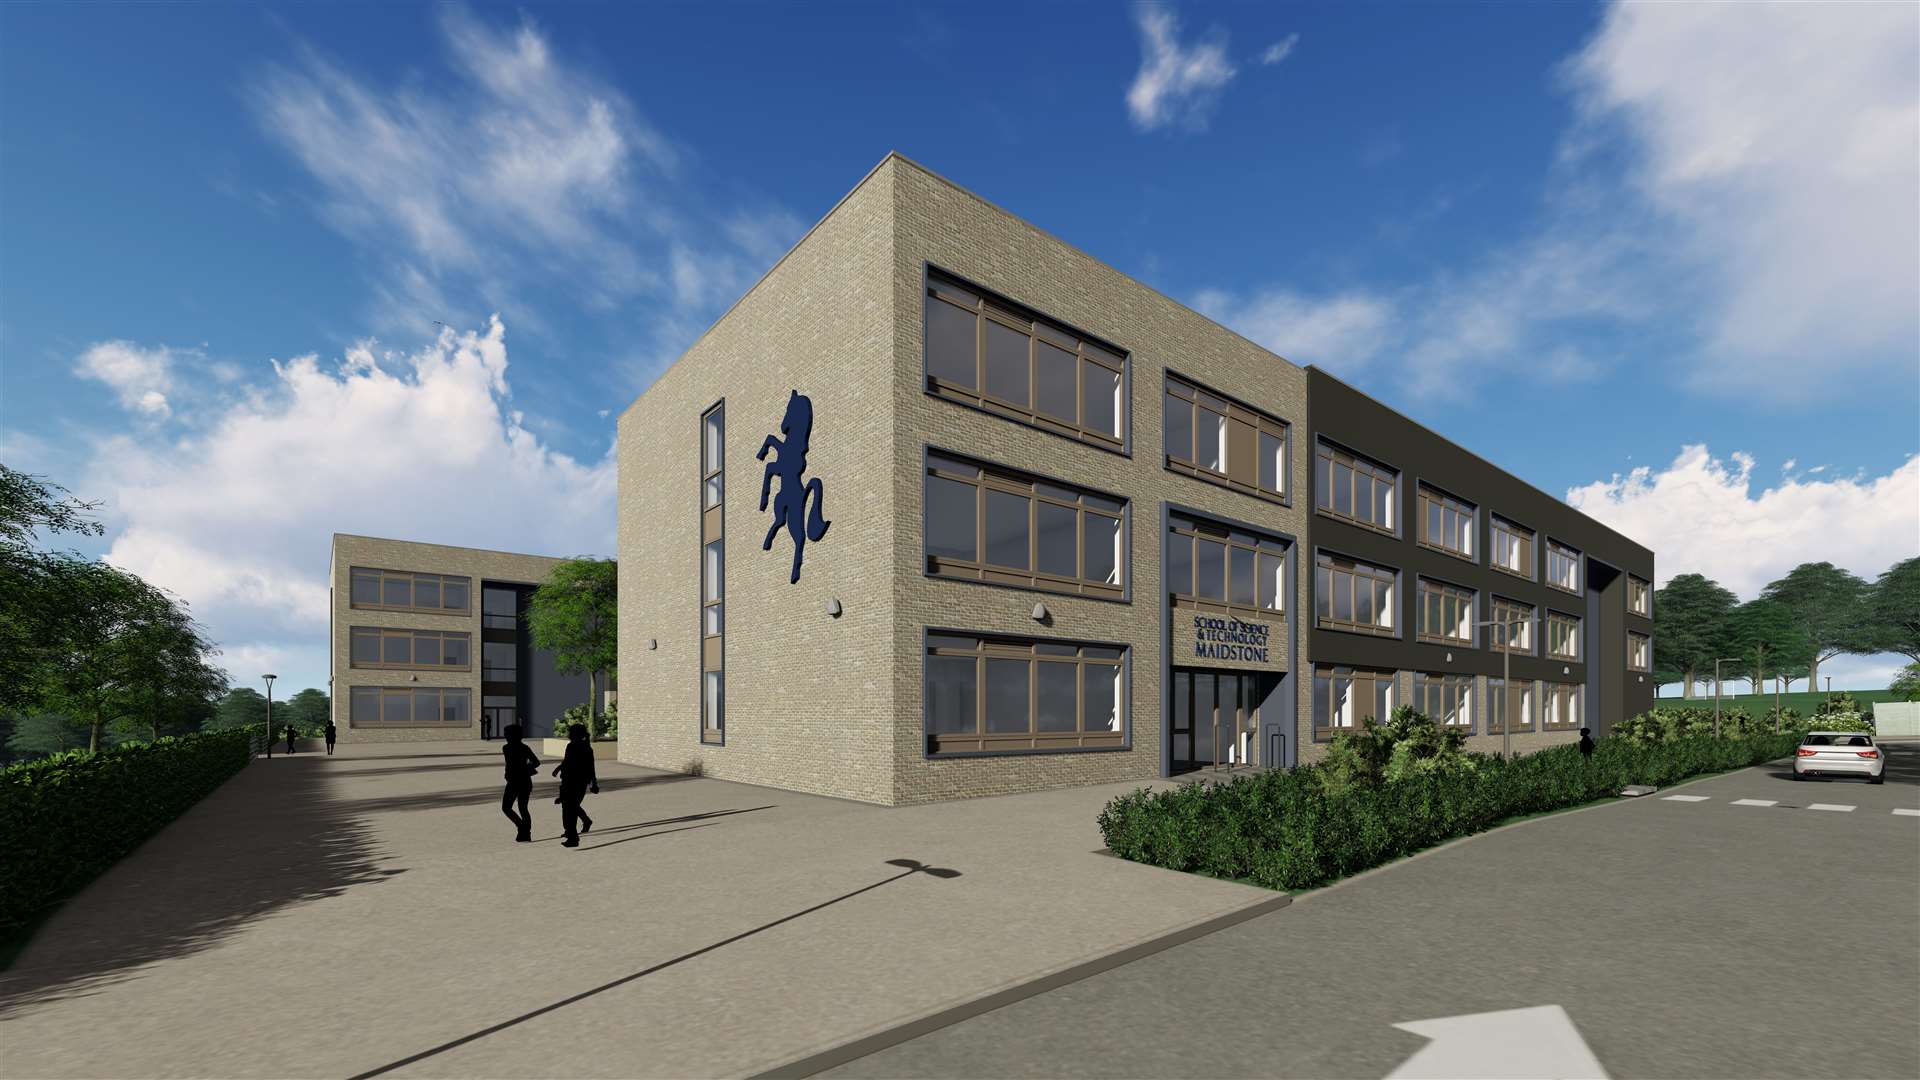 The latest artist's impression for the School of Science and Technology - Maidstone